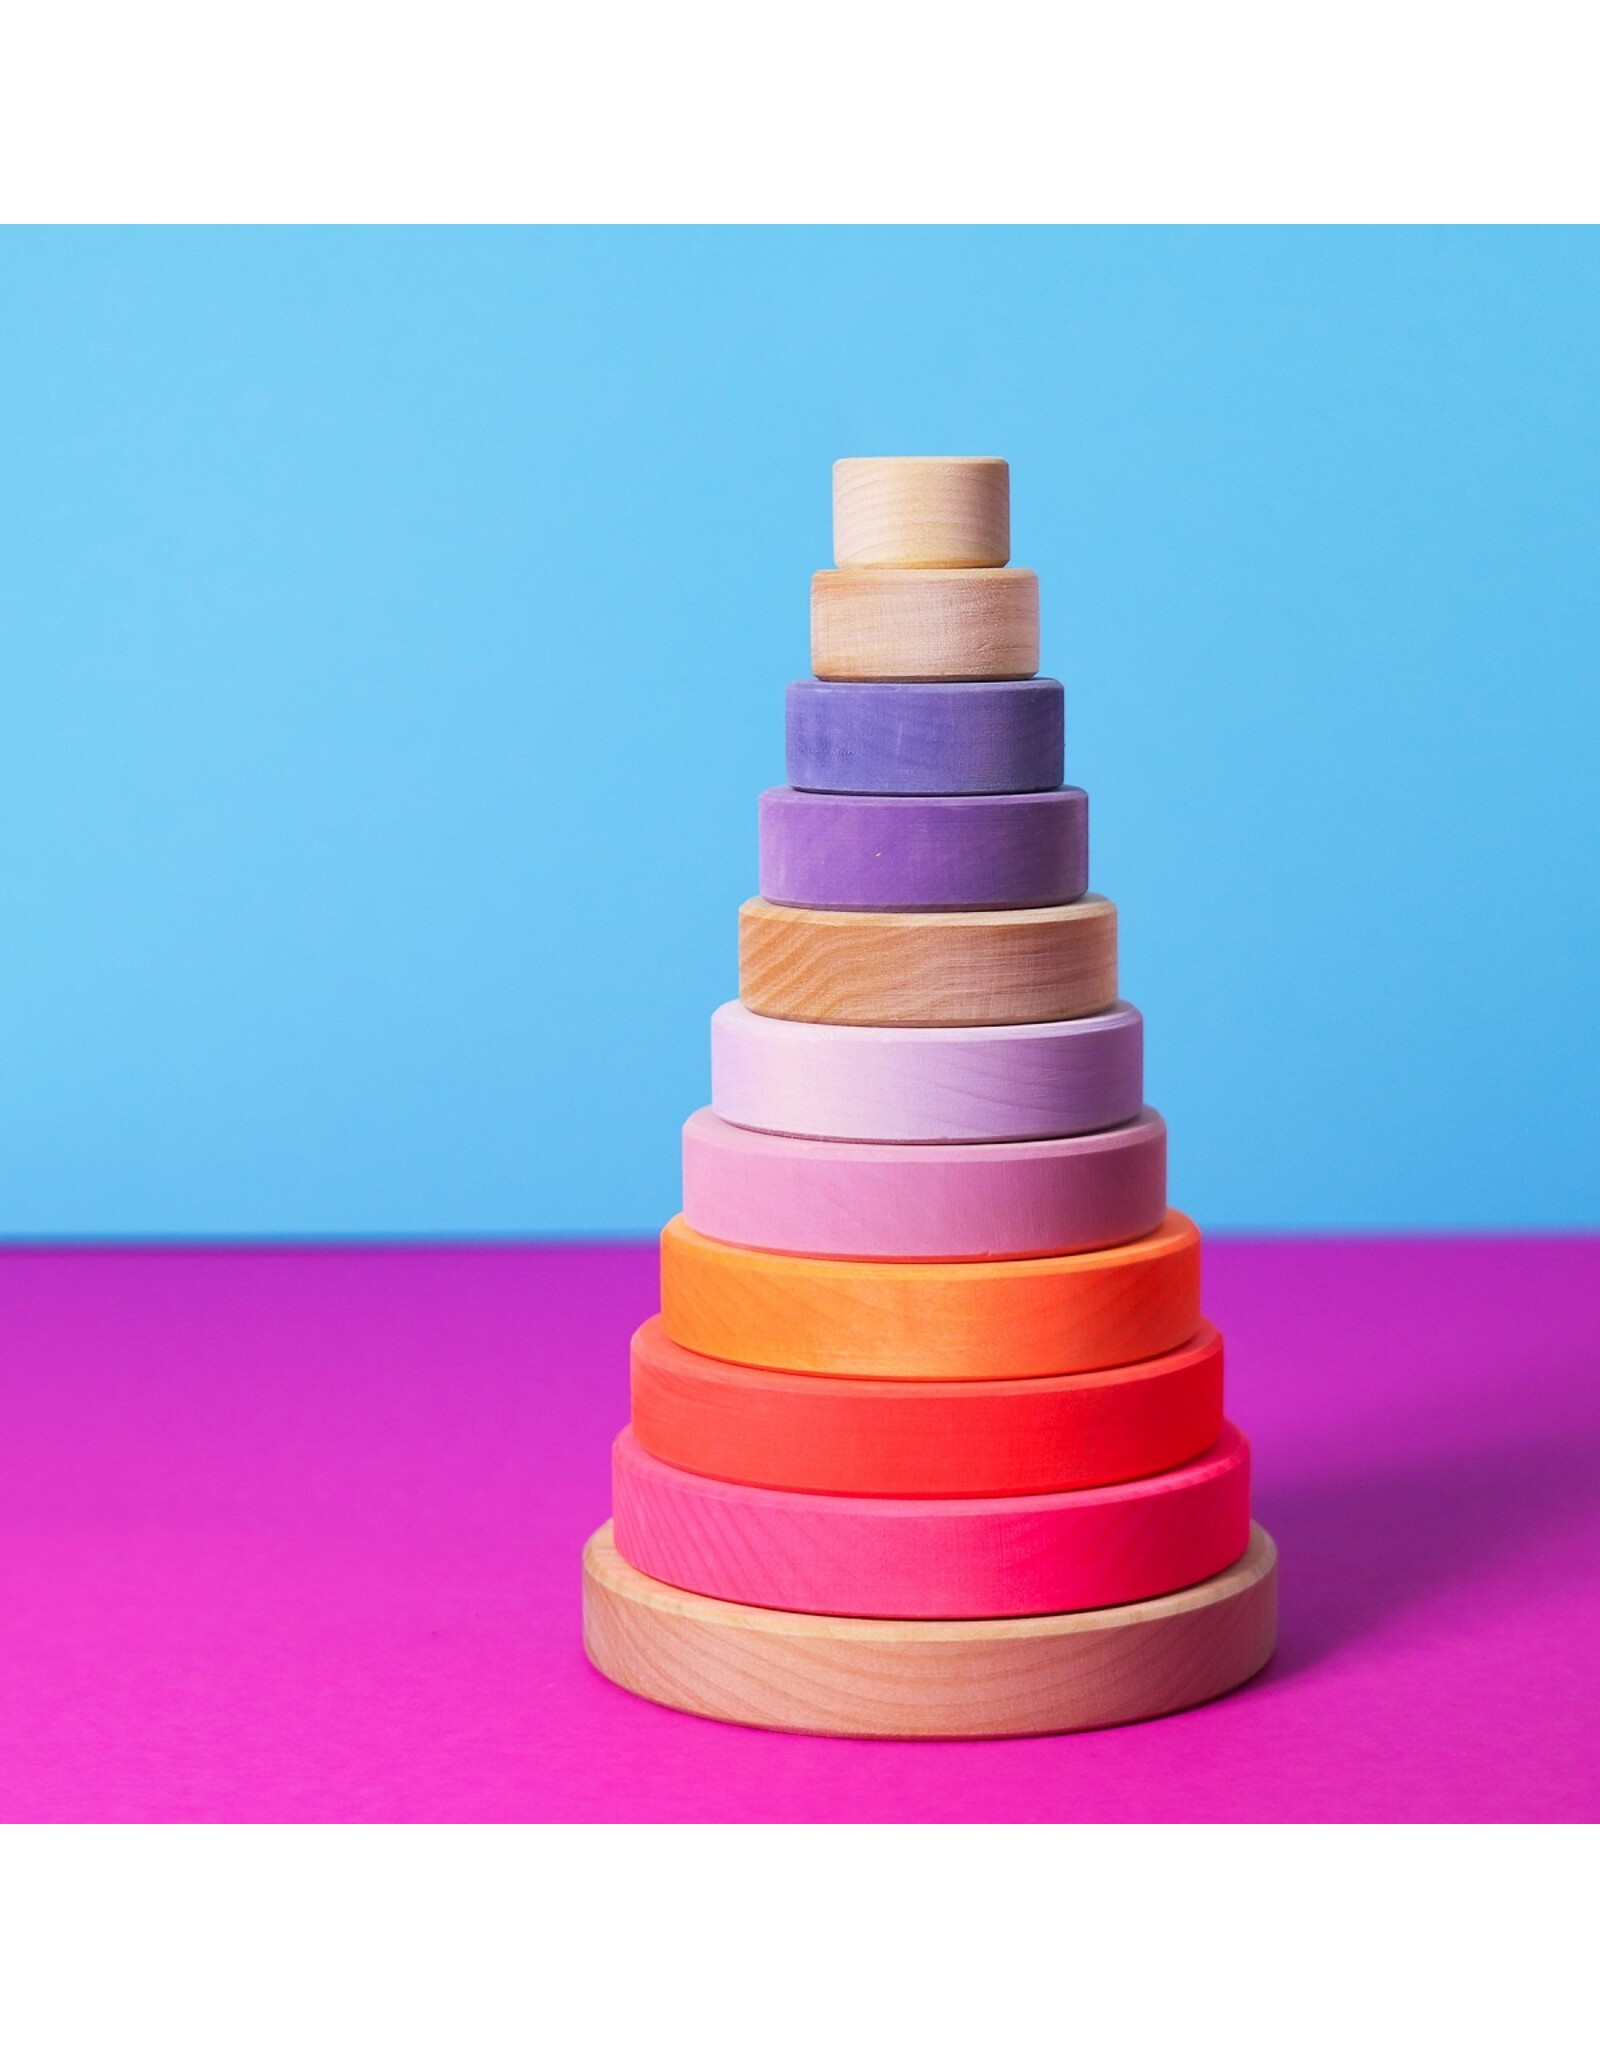 Grimm's Neon Pink Conical Stacking Tower